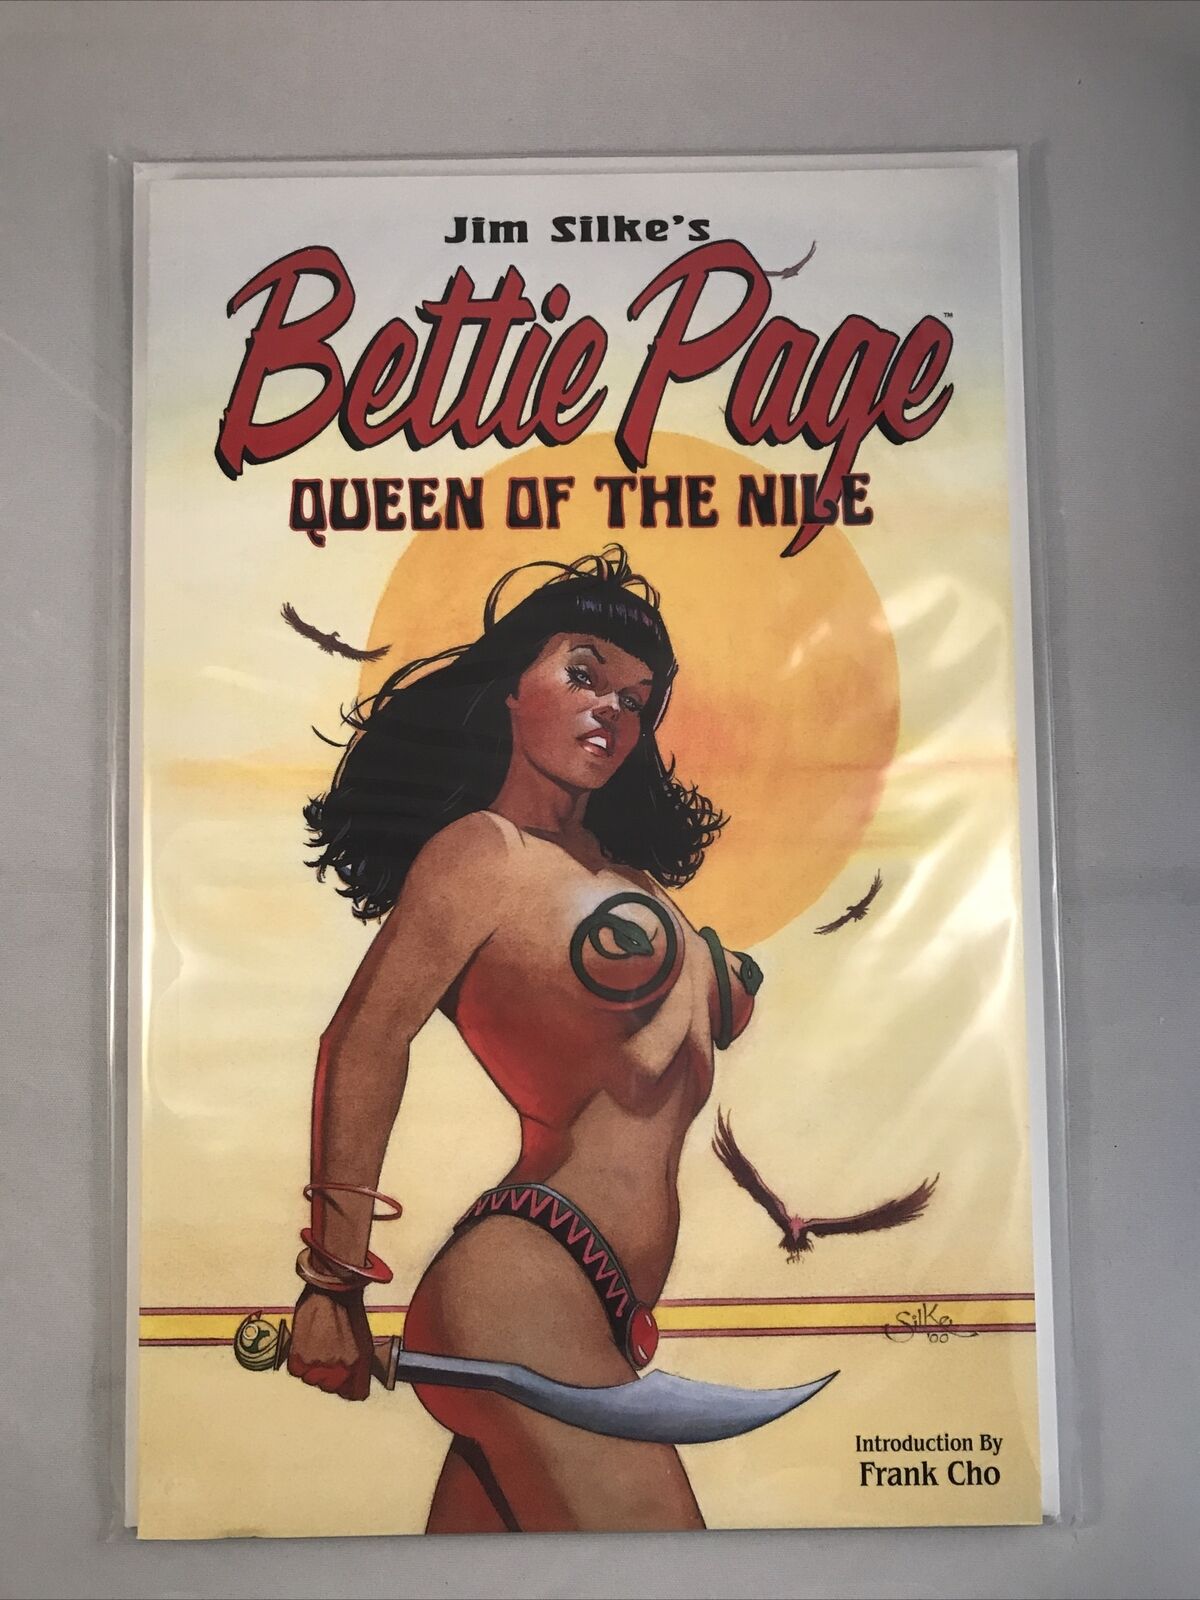 Jim Silke’s Bettie Page Queen of the Nile - NM, Unread - AWESOME ART